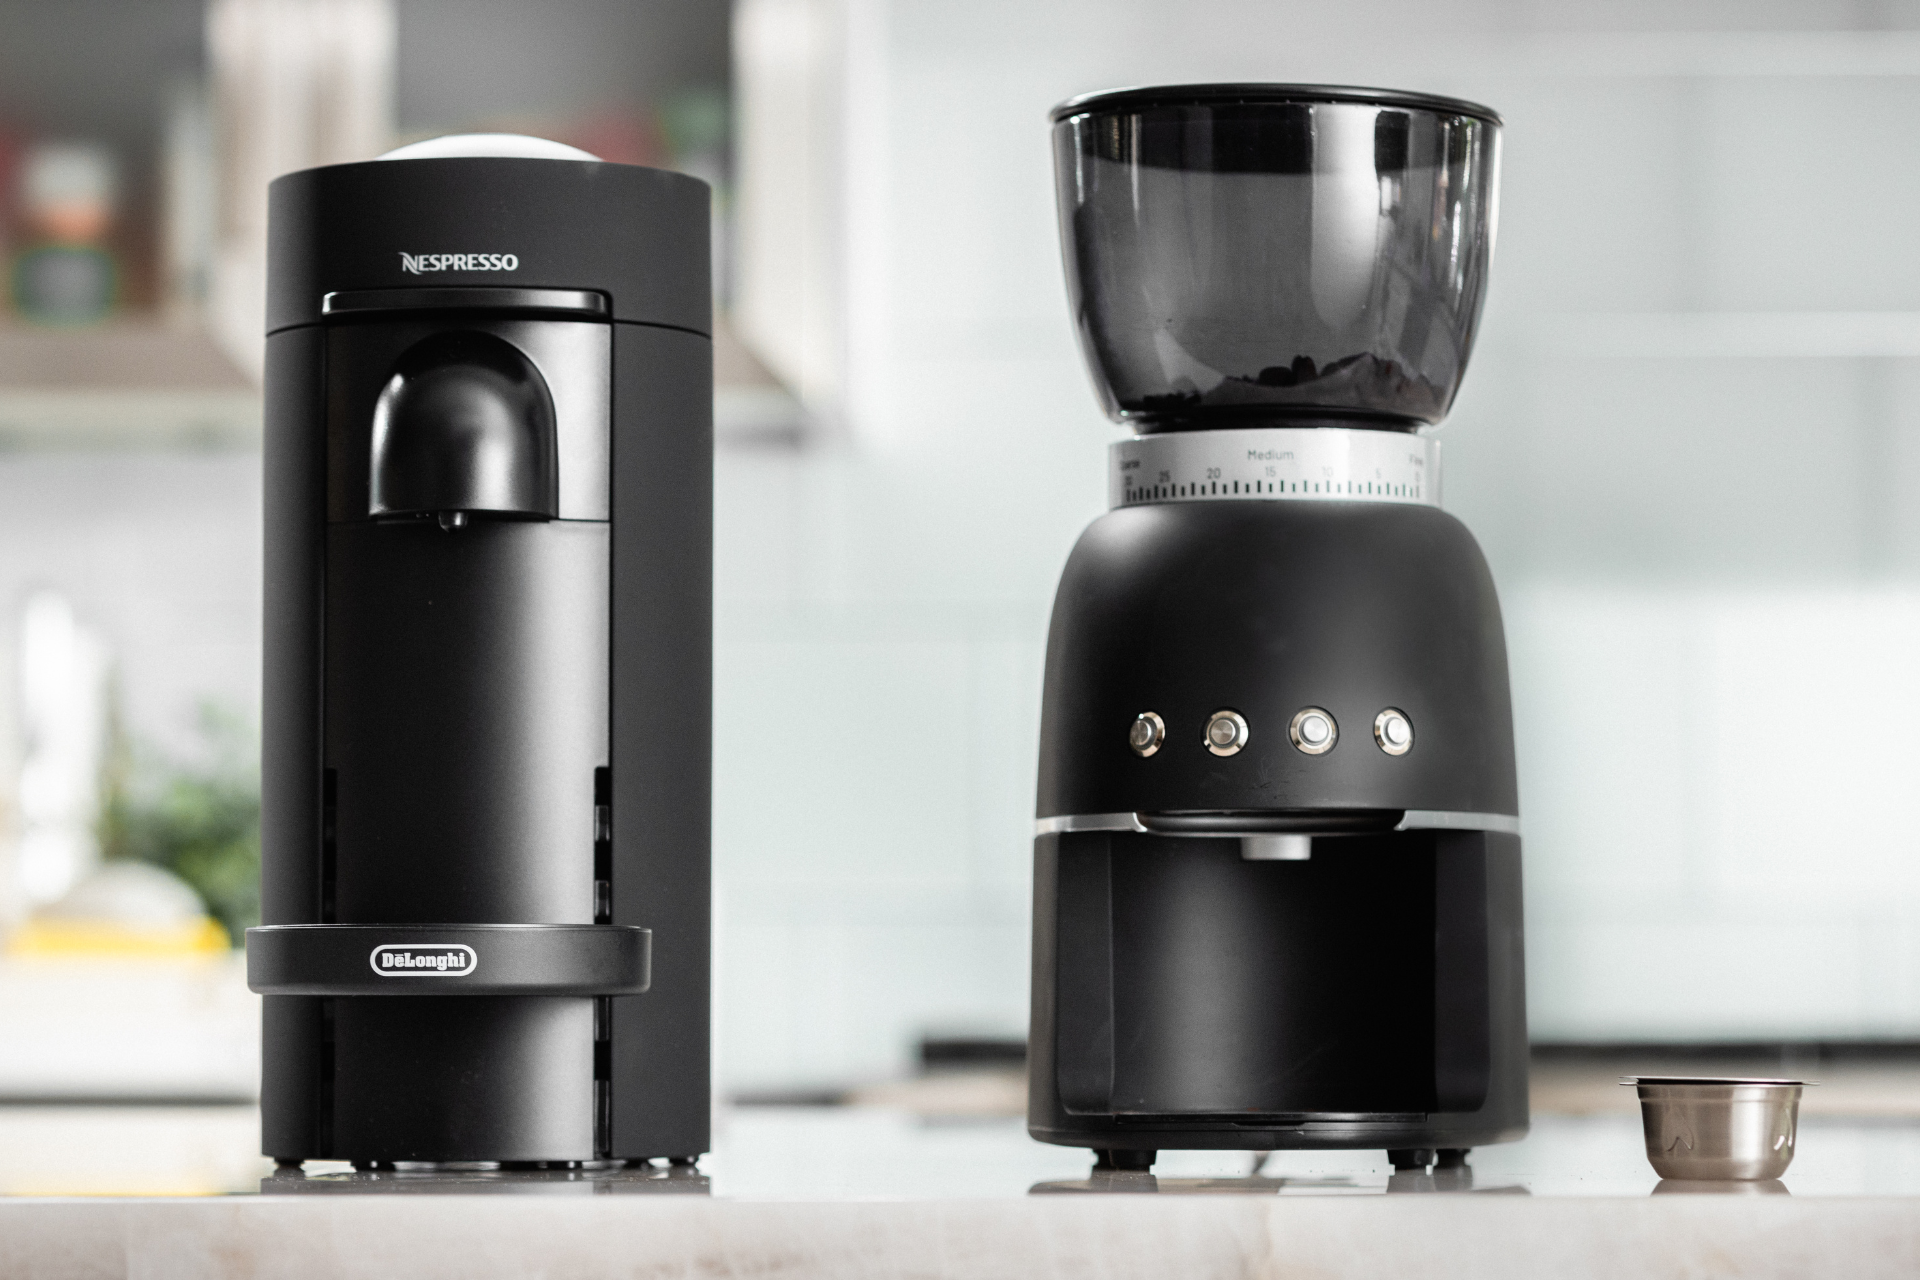 Master the Art of Refilling Nespresso® Vertuo Pods with PodMkr